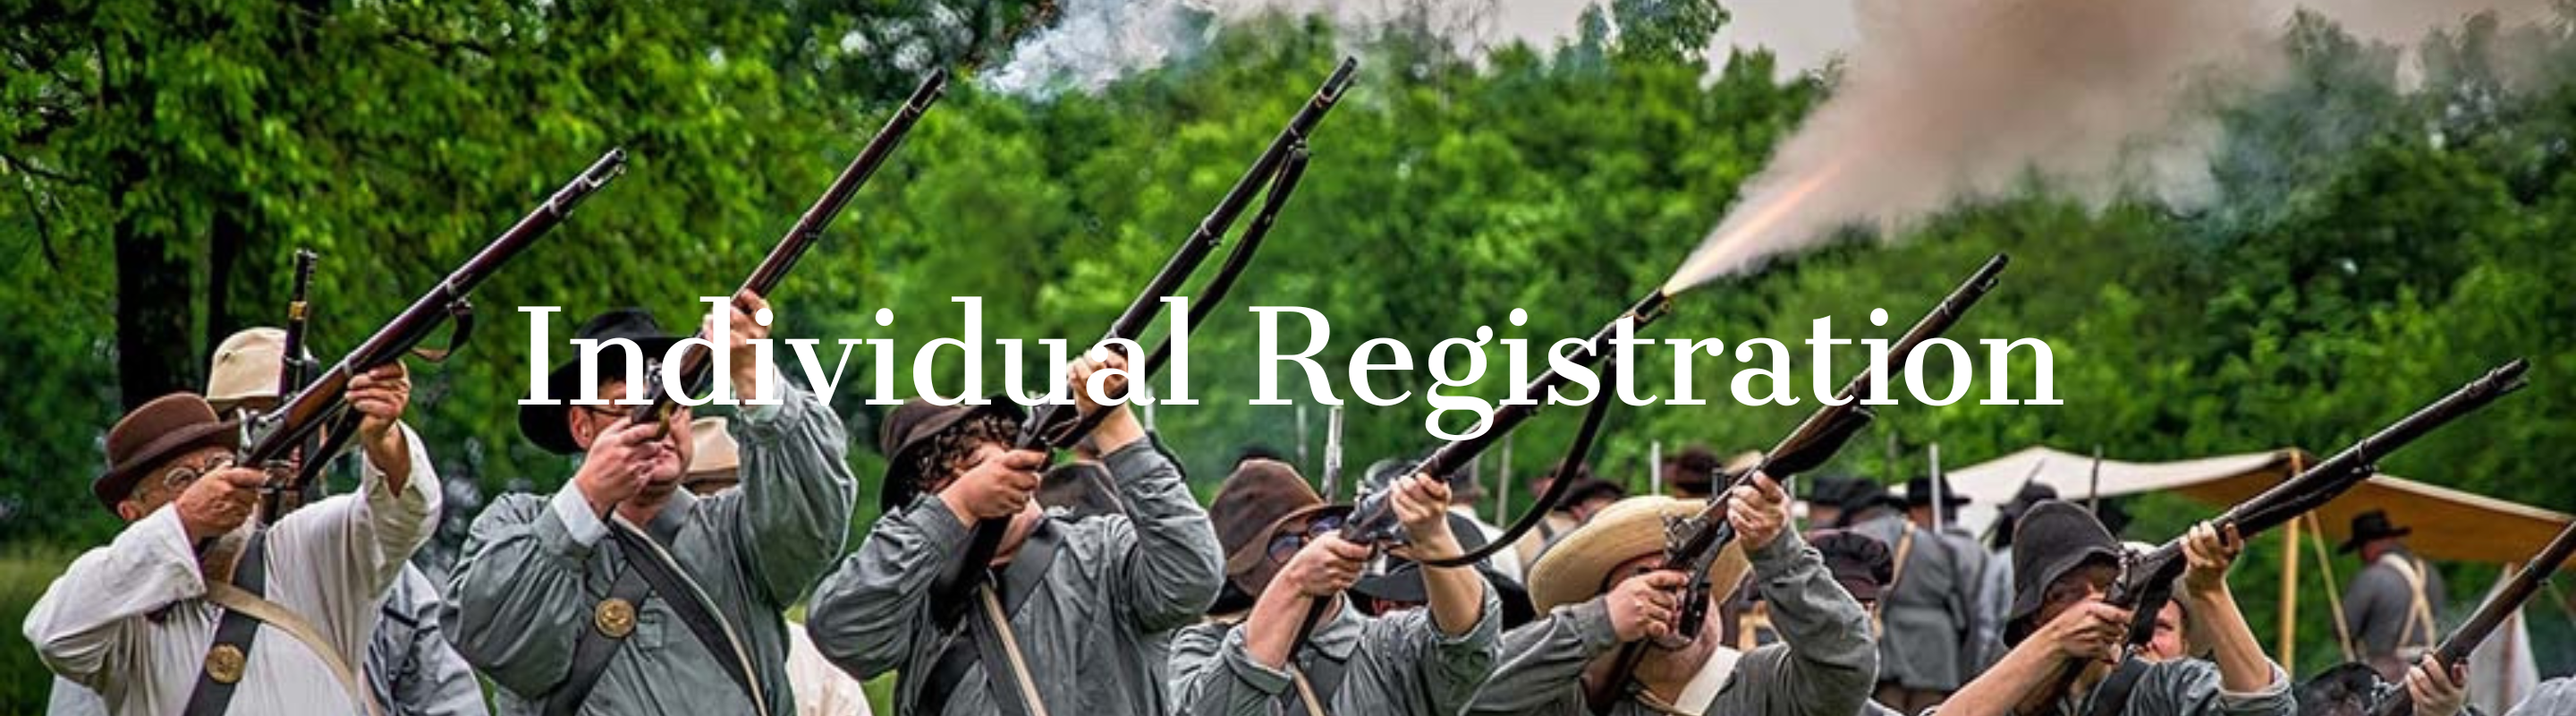 Individual Registration Page